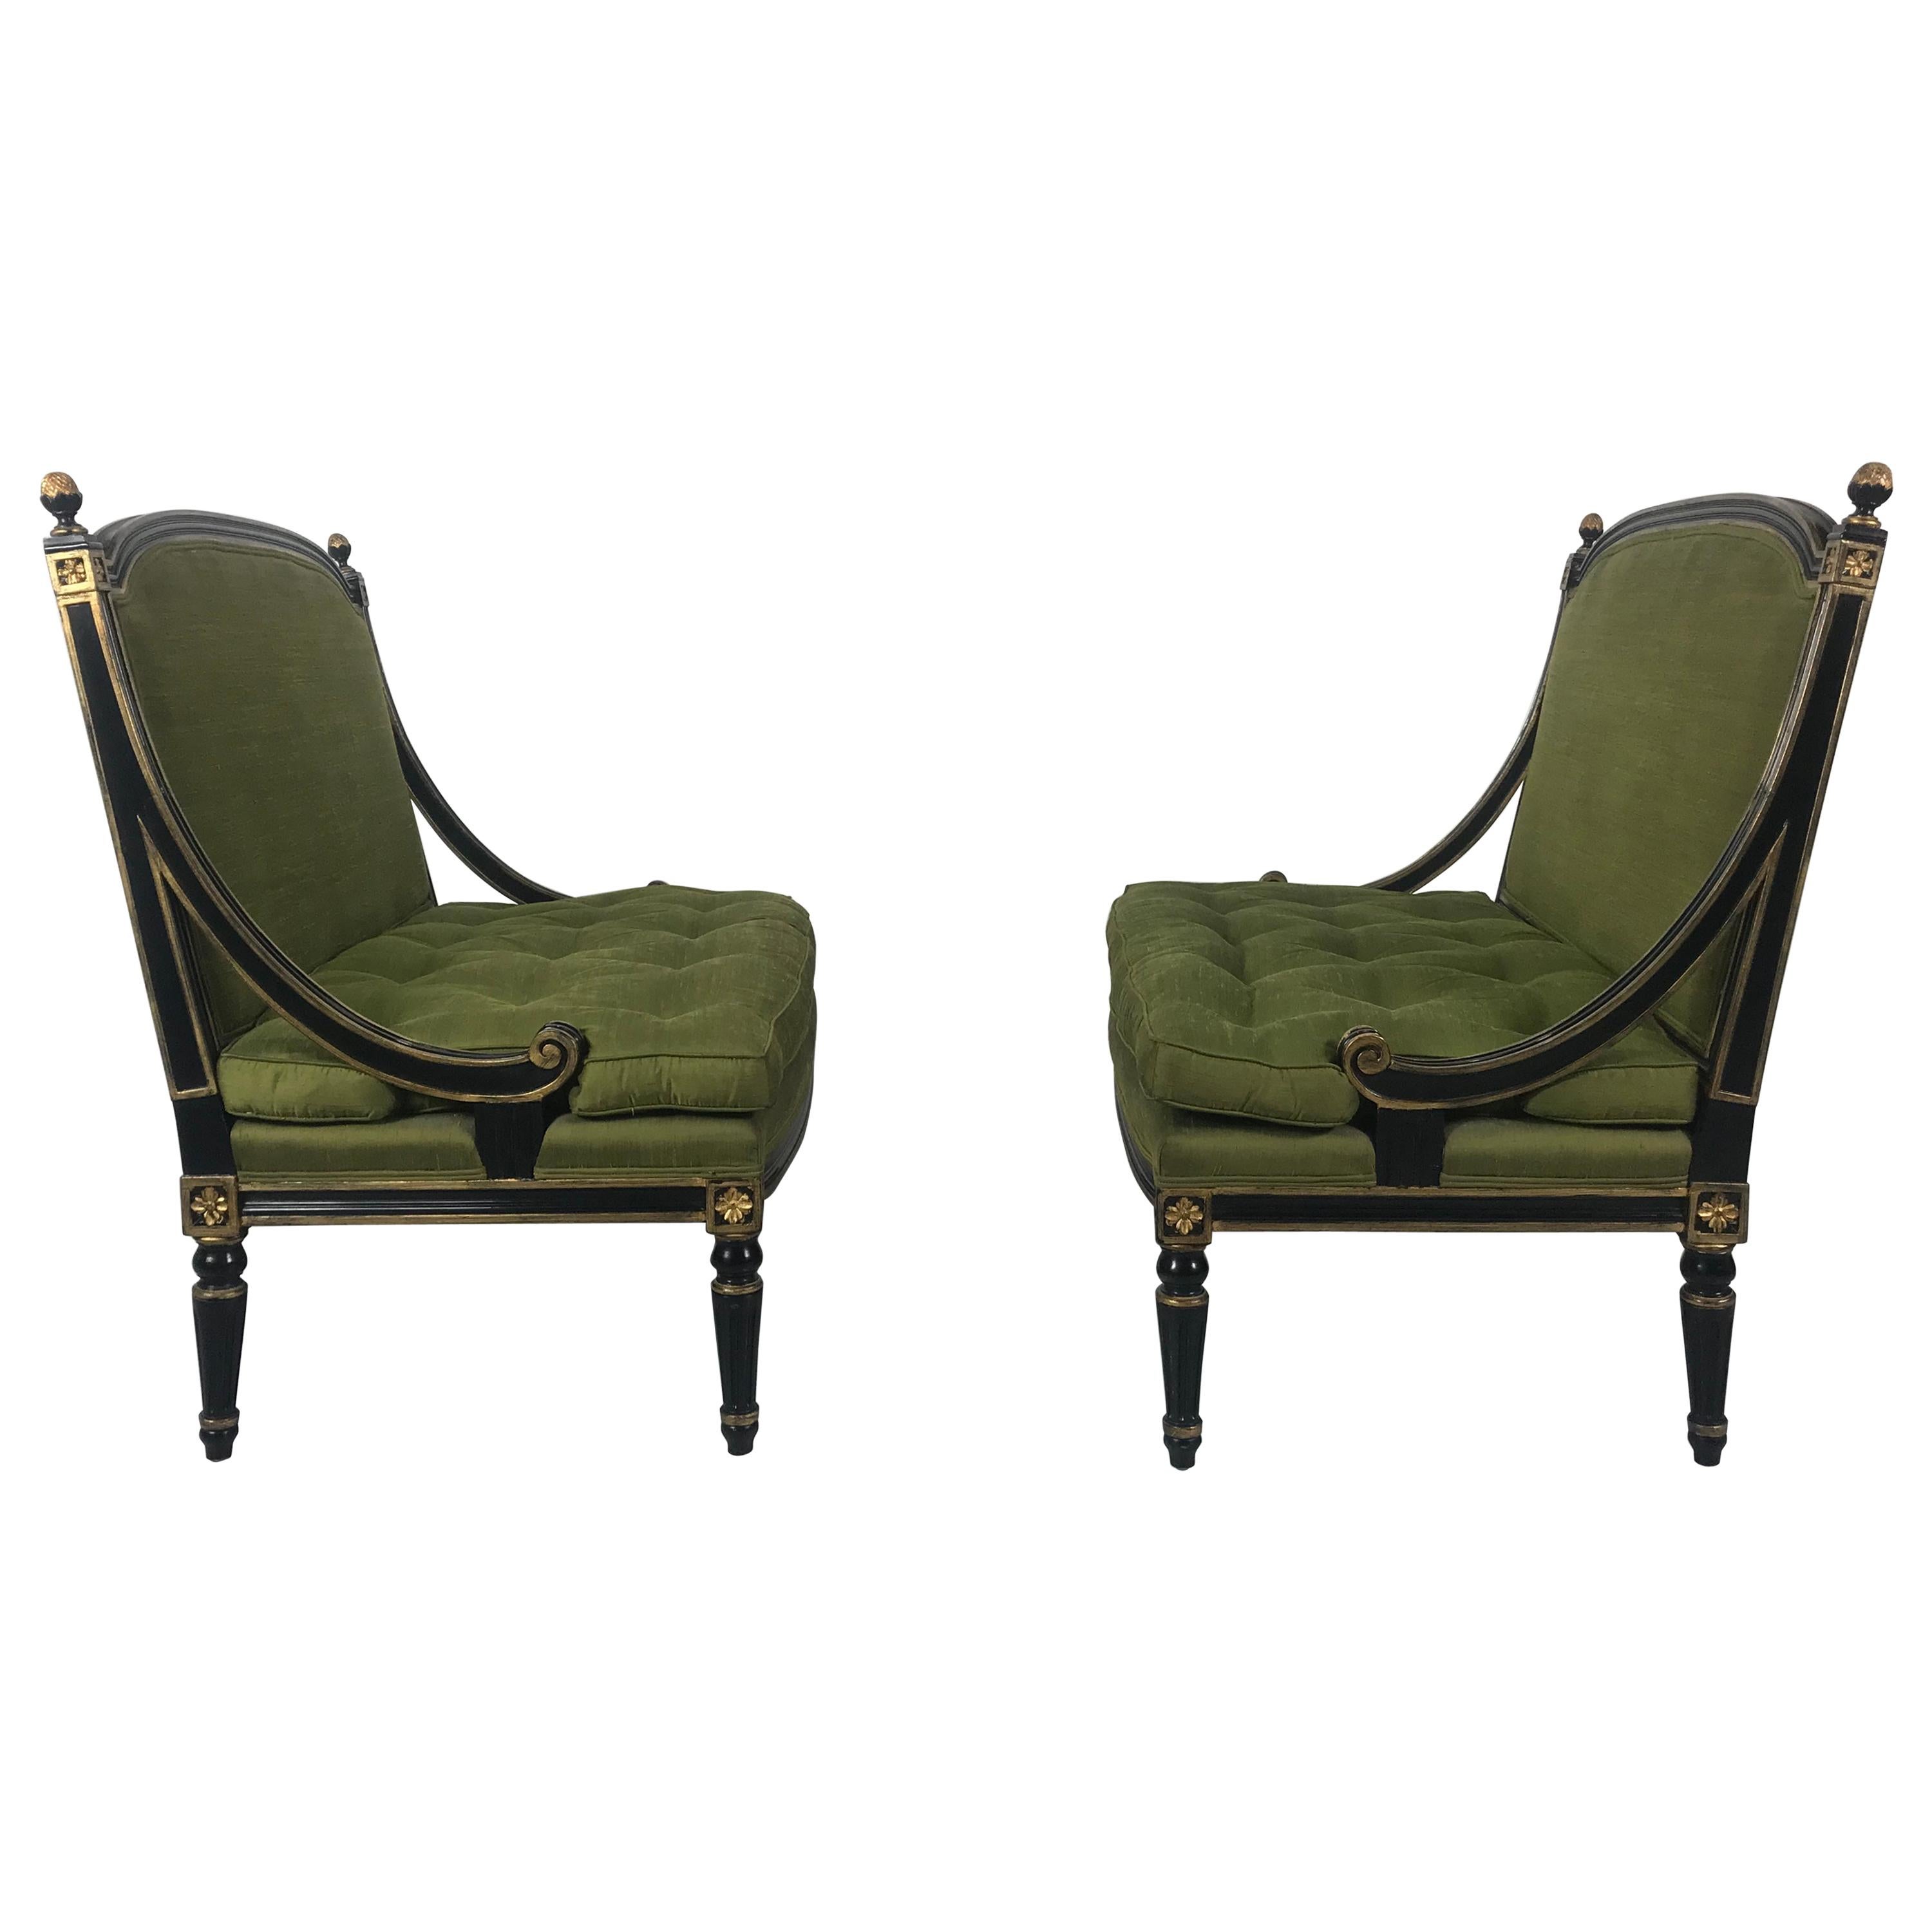 Matched Pair of Louis XV Style Lacquered and Gilt Settee's, Loveseats